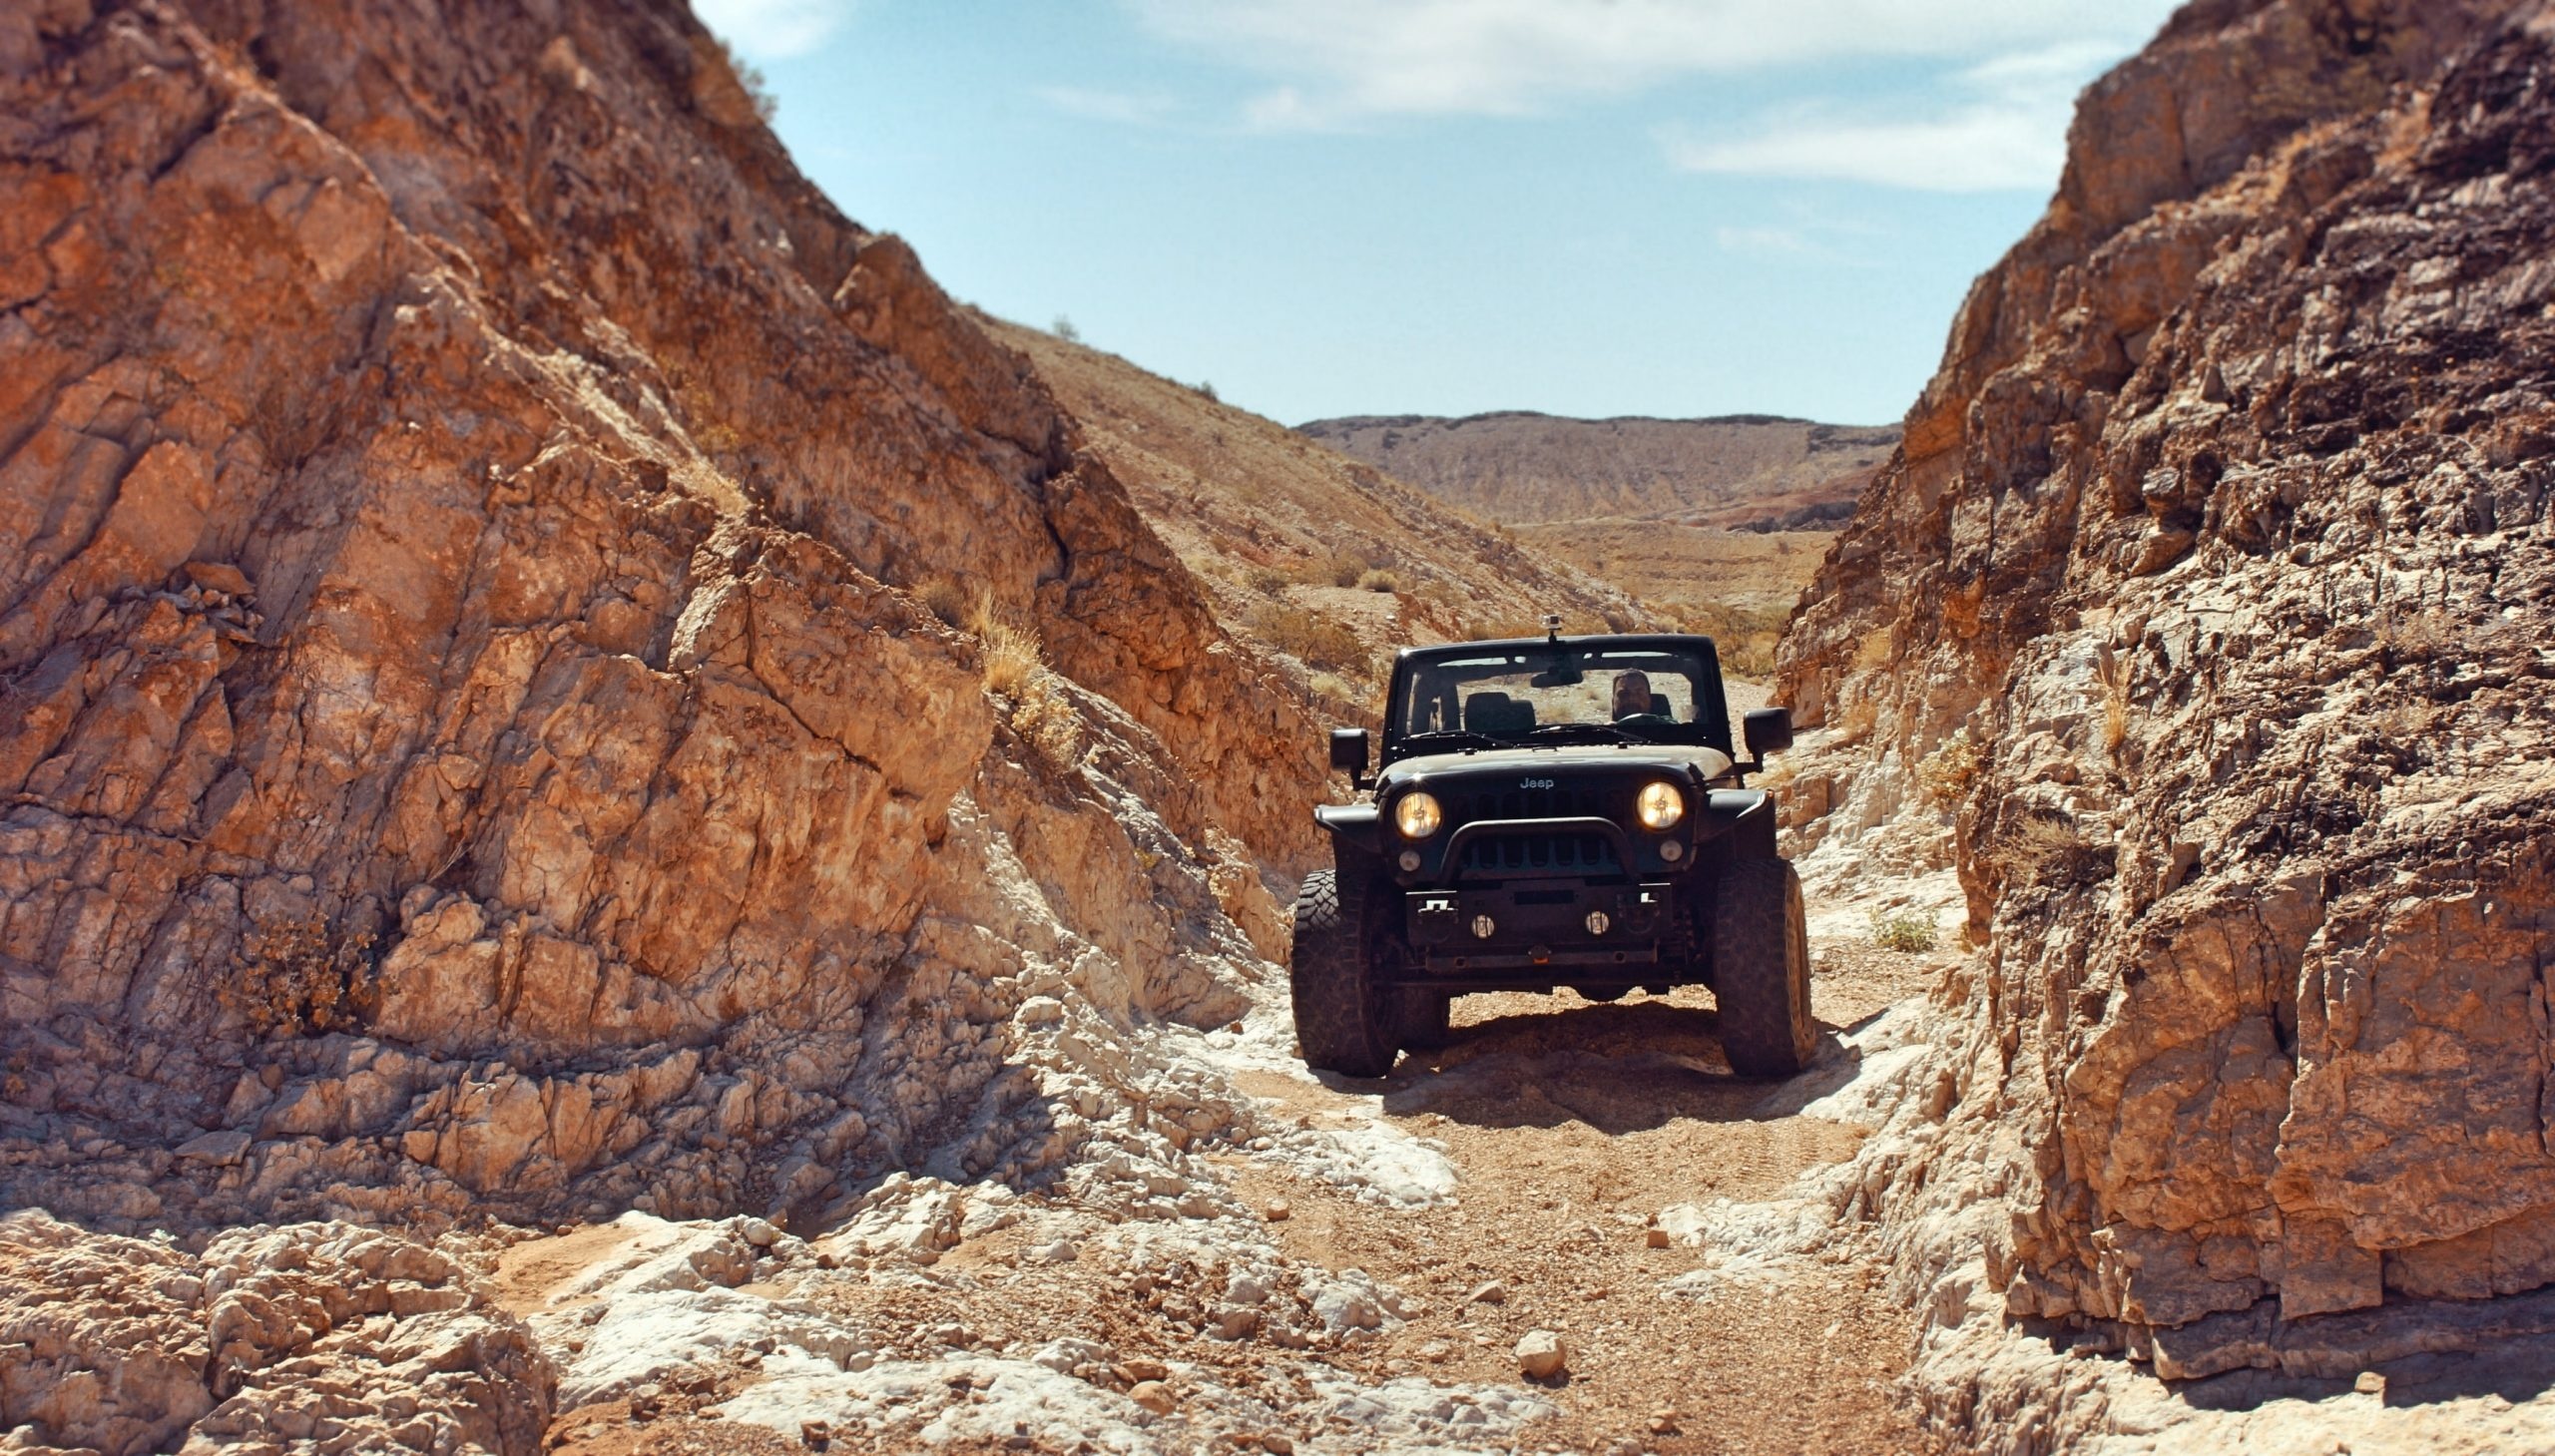 Off-road Driving: Rock racing, Vehicles driven over rocks, SUVs with higher ground clearance. 2560x1460 HD Wallpaper.